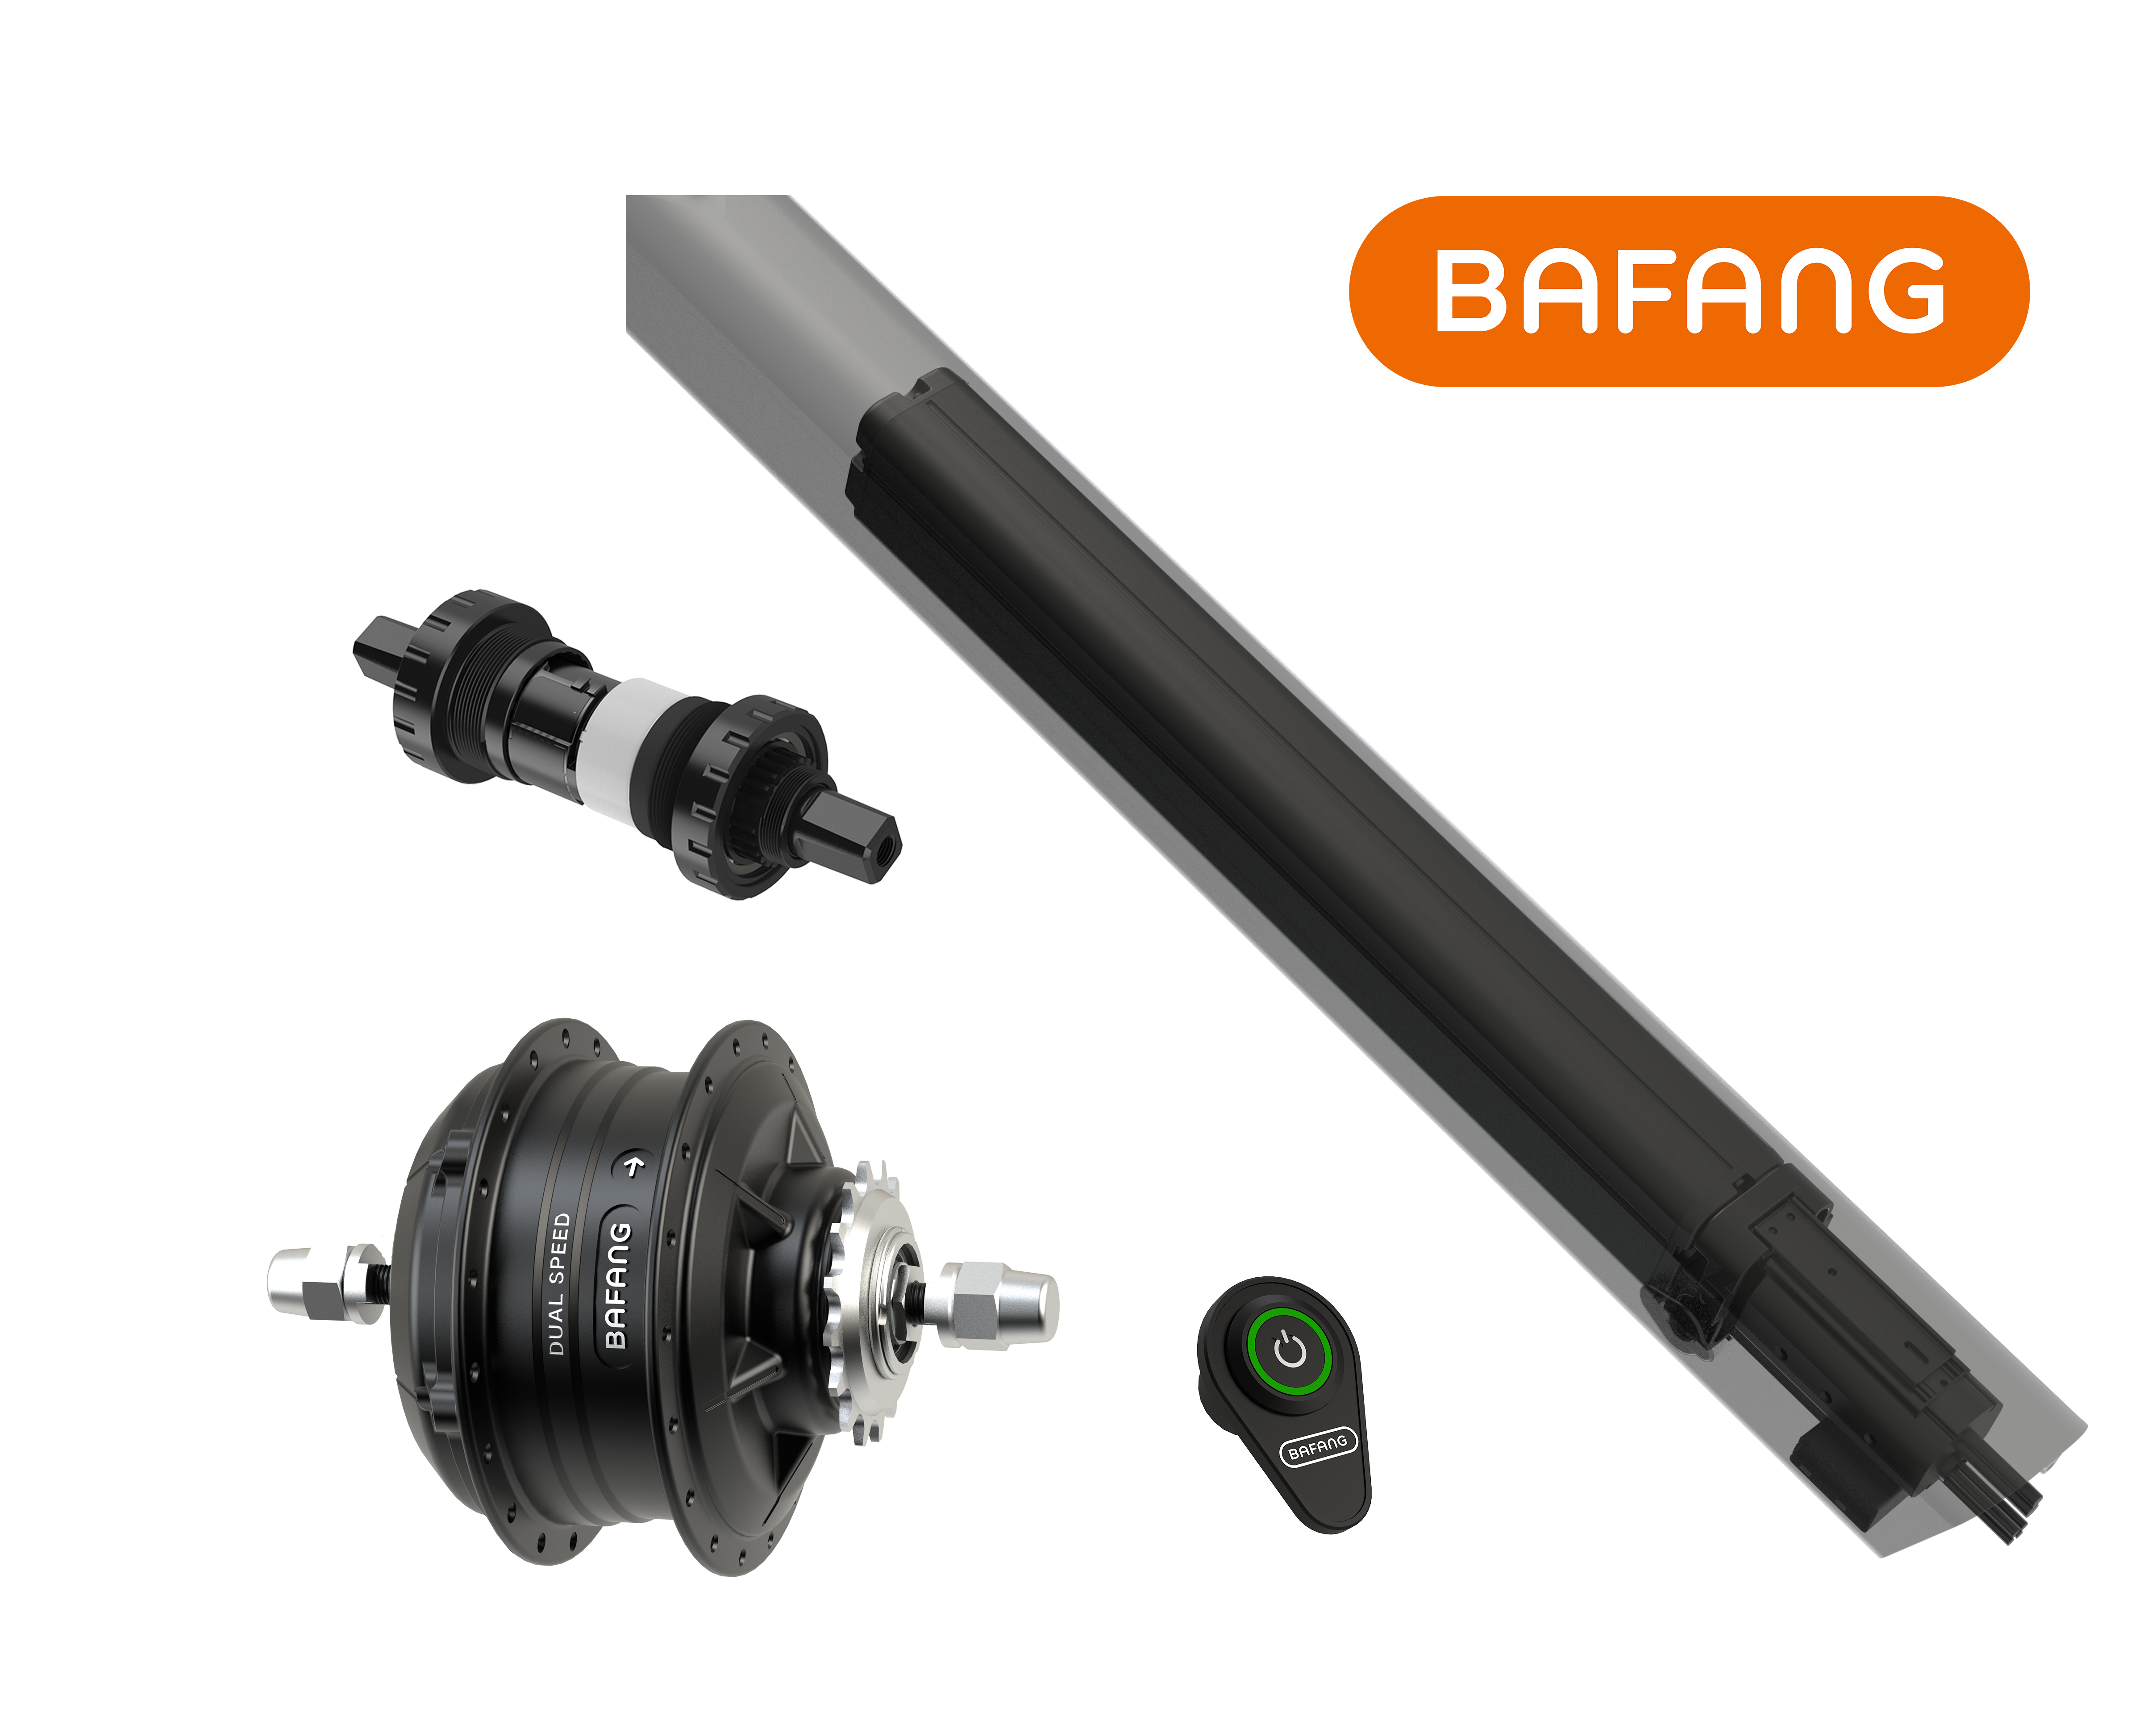 Bafang launches H700 built-in automatic dual speed drive system